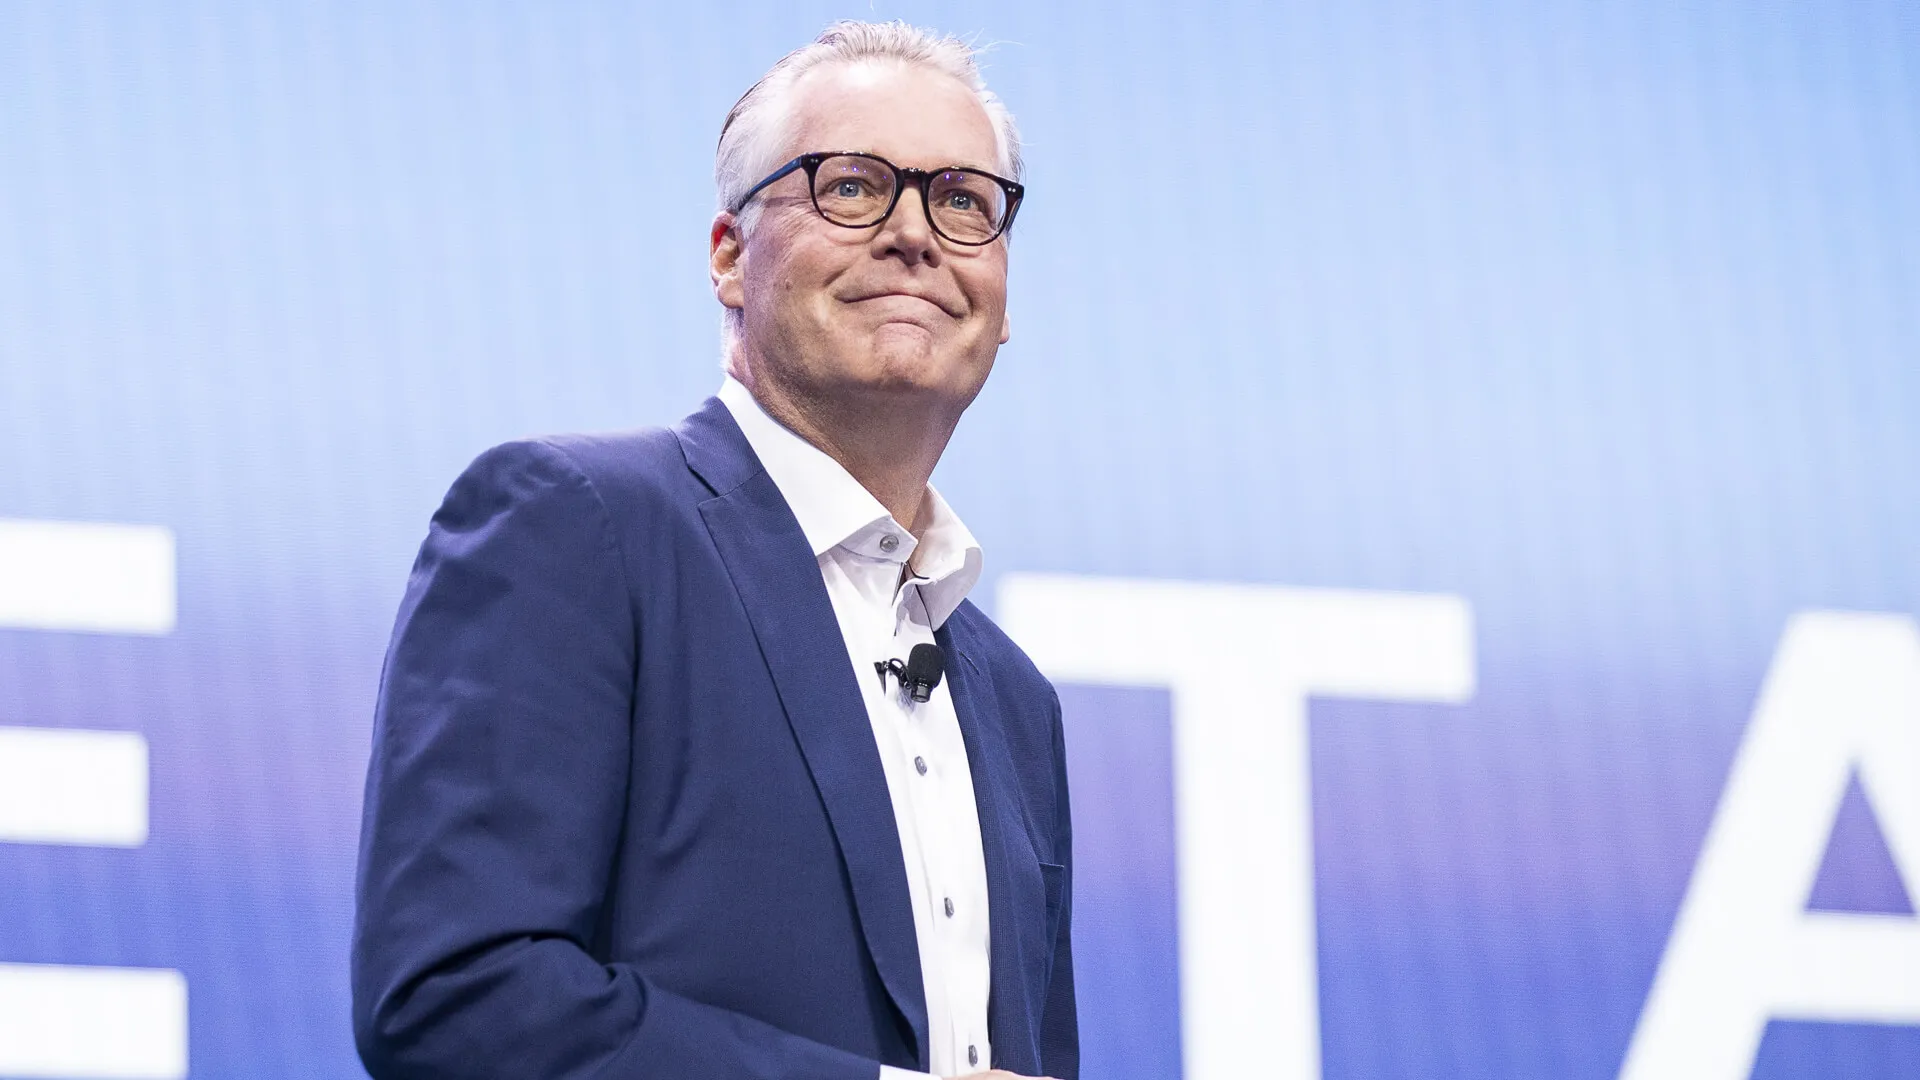 Mandatory Credit: Photo by ETIENNE LAURENT/EPA-EFE/Shutterstock (10520034b)Delta Airline CEO Ed Bastian delivers a speech during the Delta keynote at the 2020 International Consumer Electronics Show in Las Vegas, Nevada, USA, 07 January 2020.